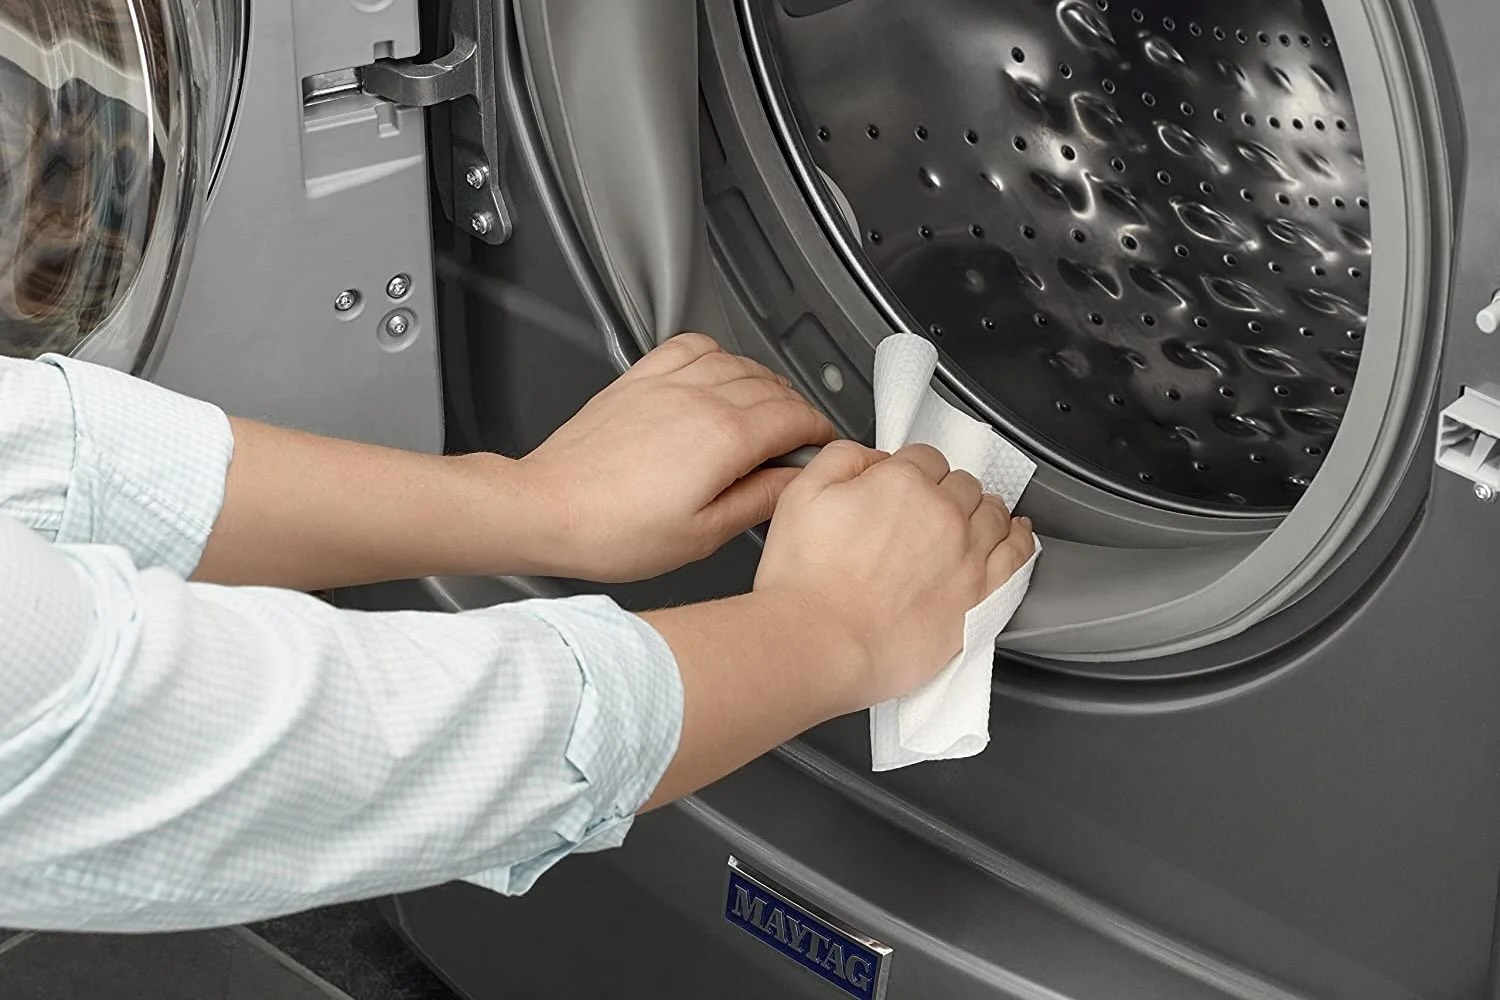 How To Clean A Maytag Washing Machine